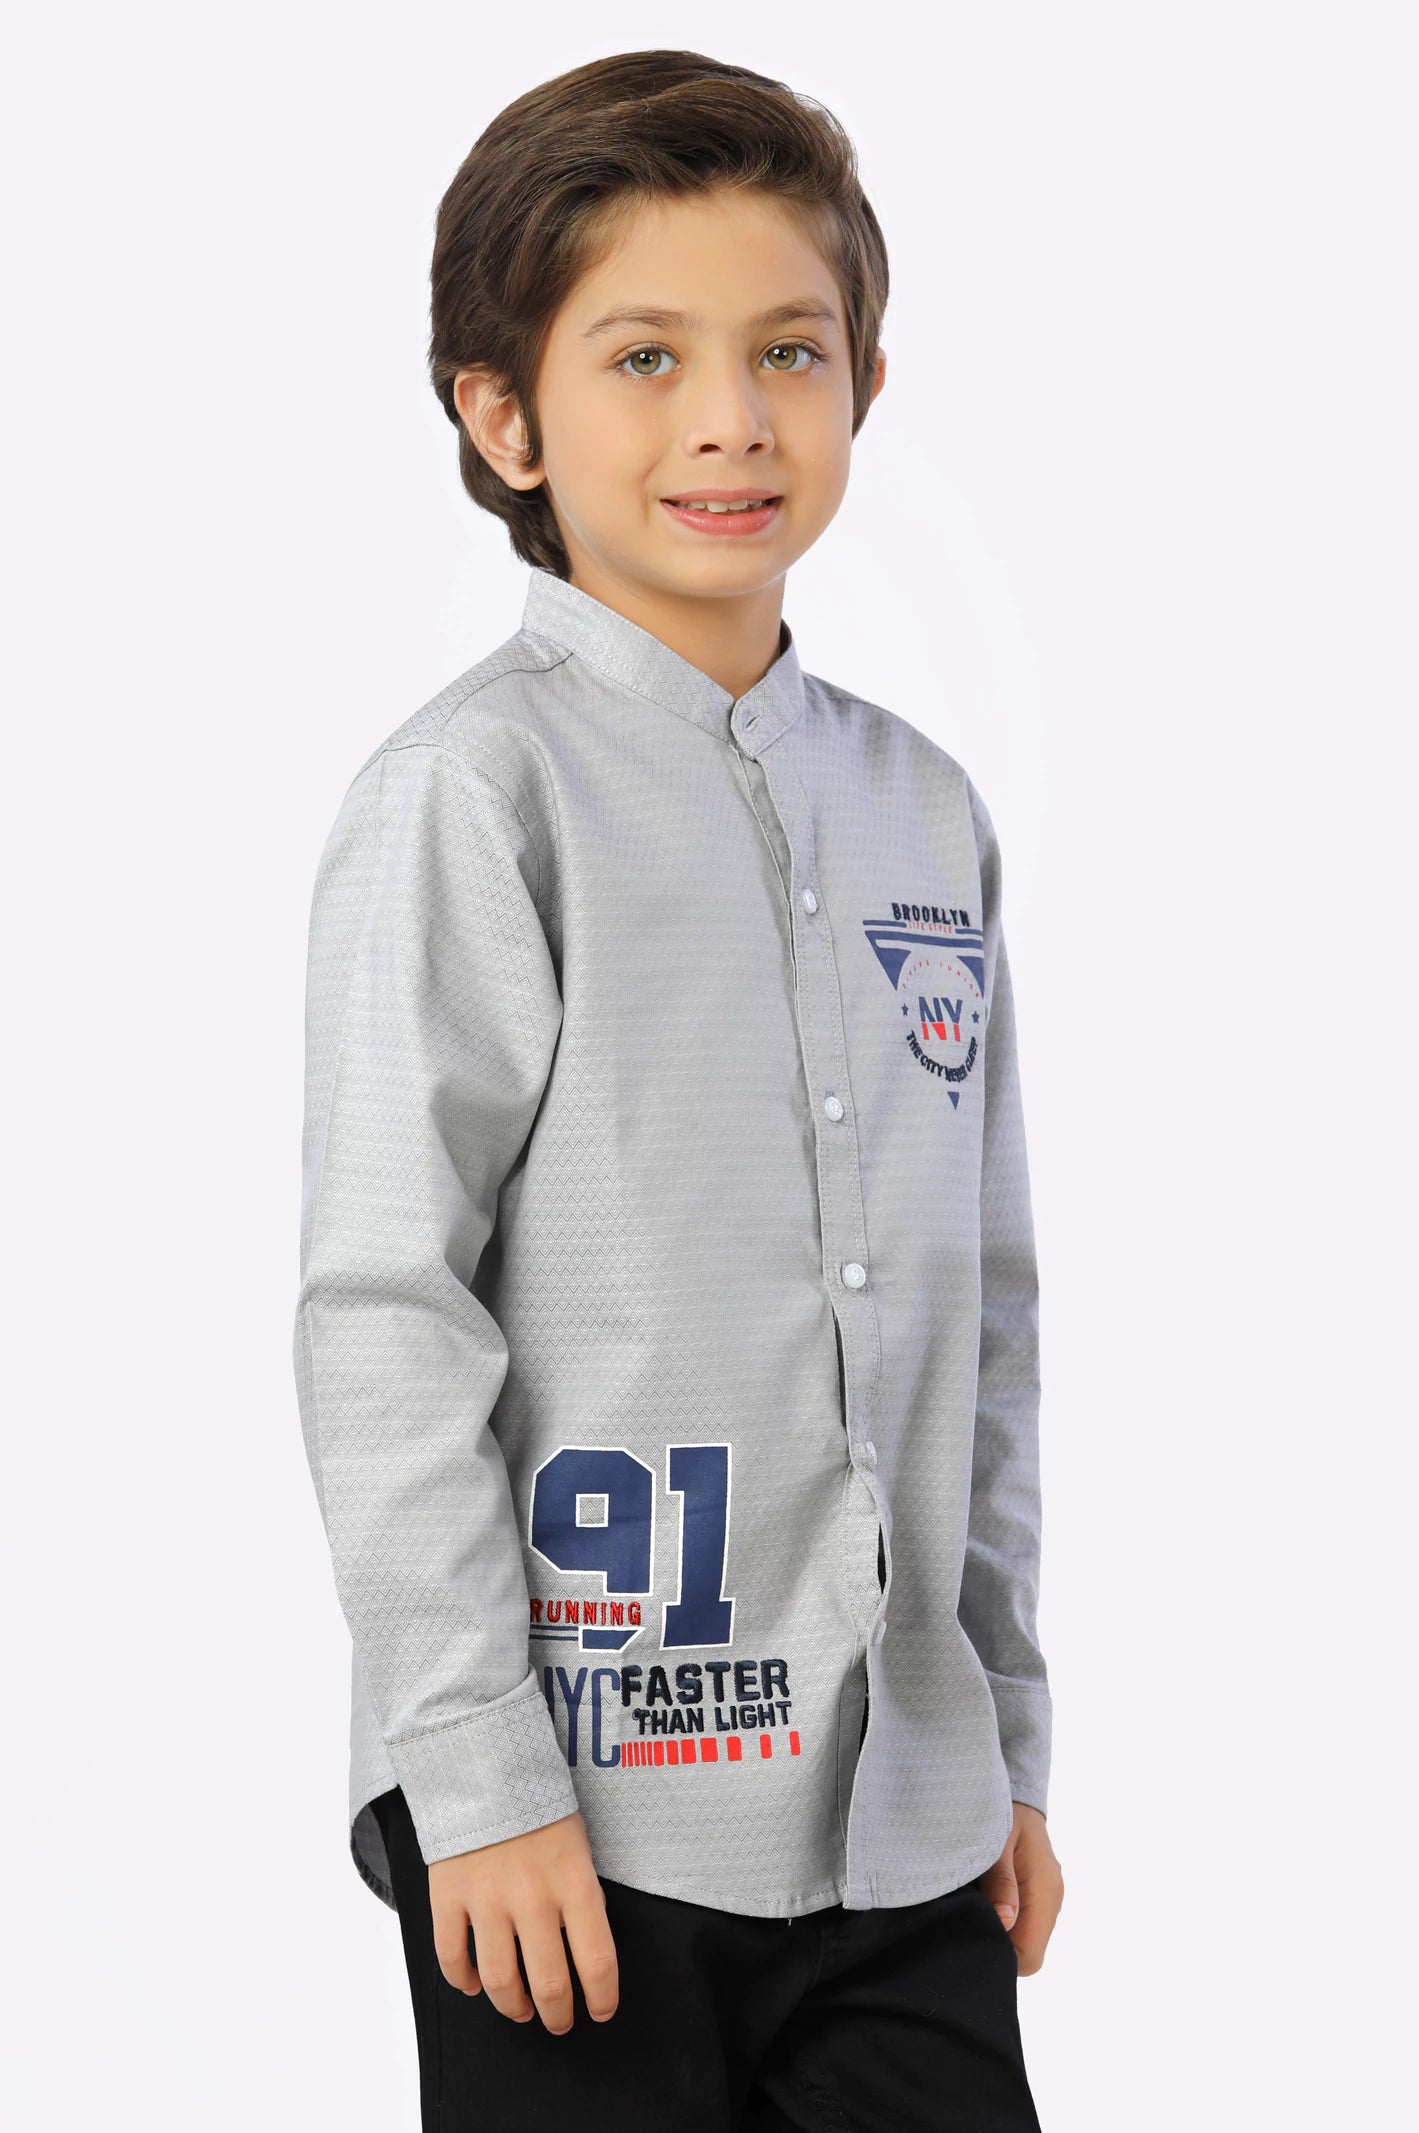 Silver Self Textured Boys Shirt From Diners